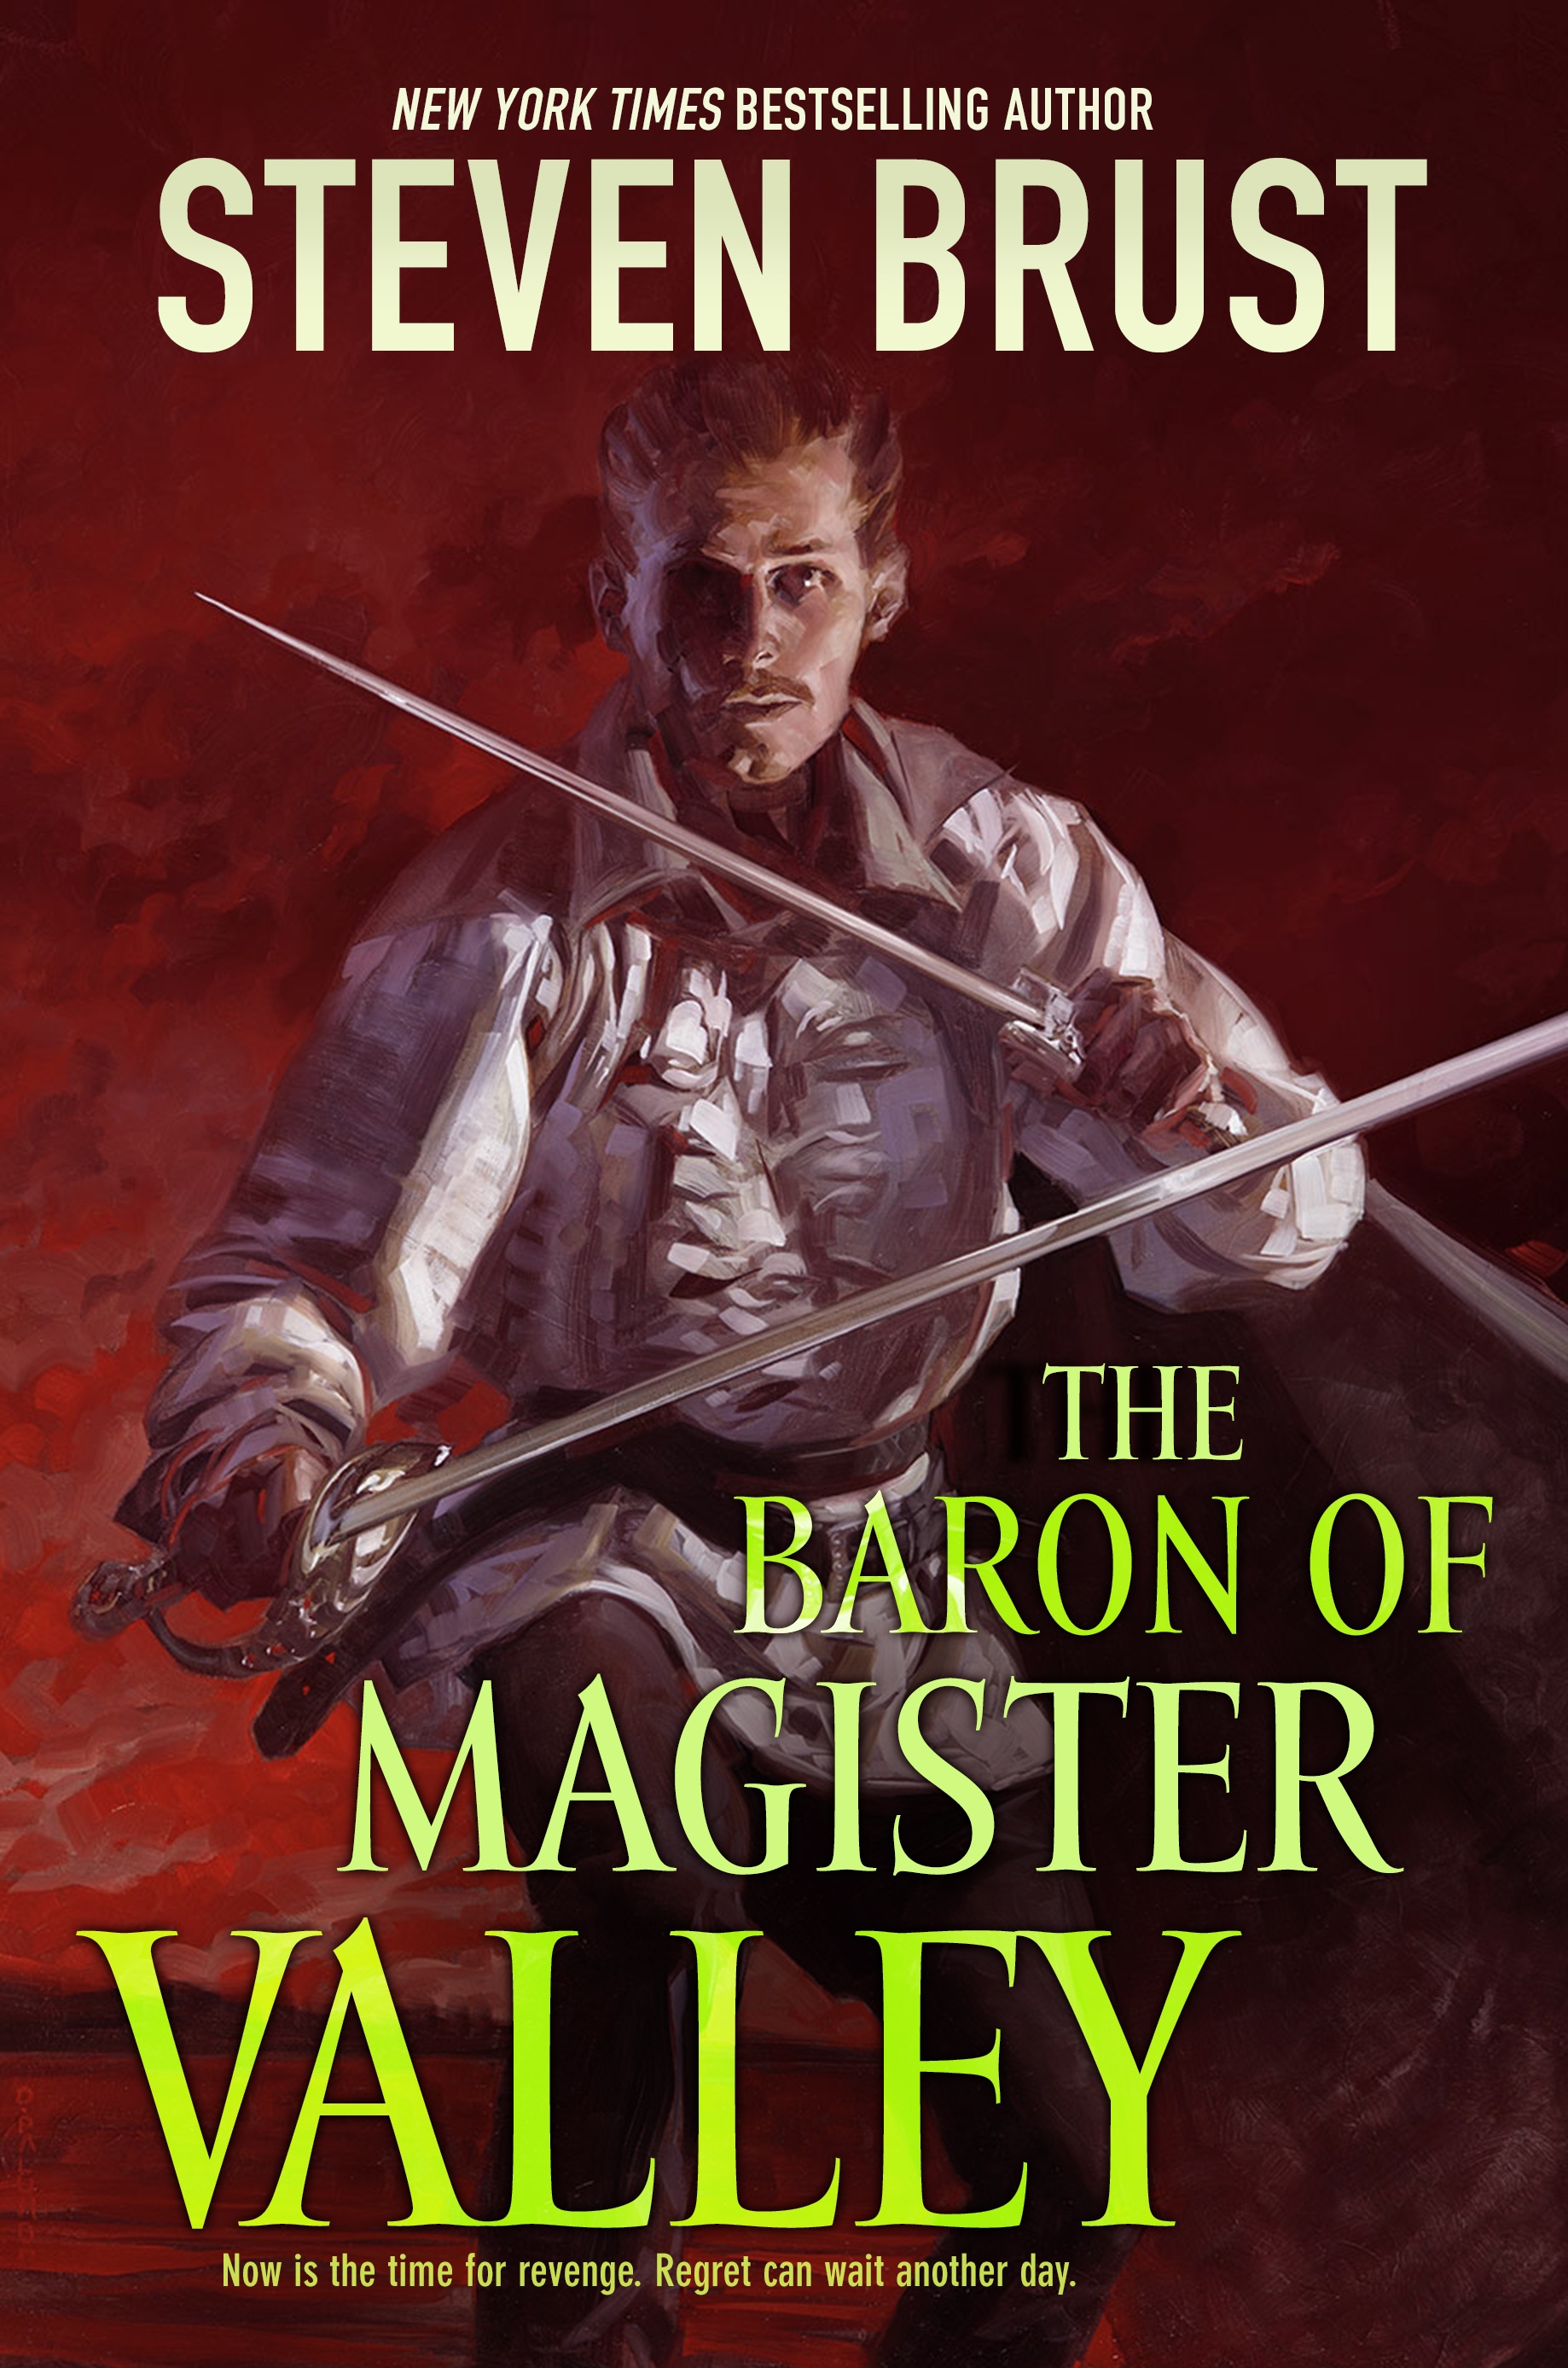 The Baron of Magister Valley by Steven Brust